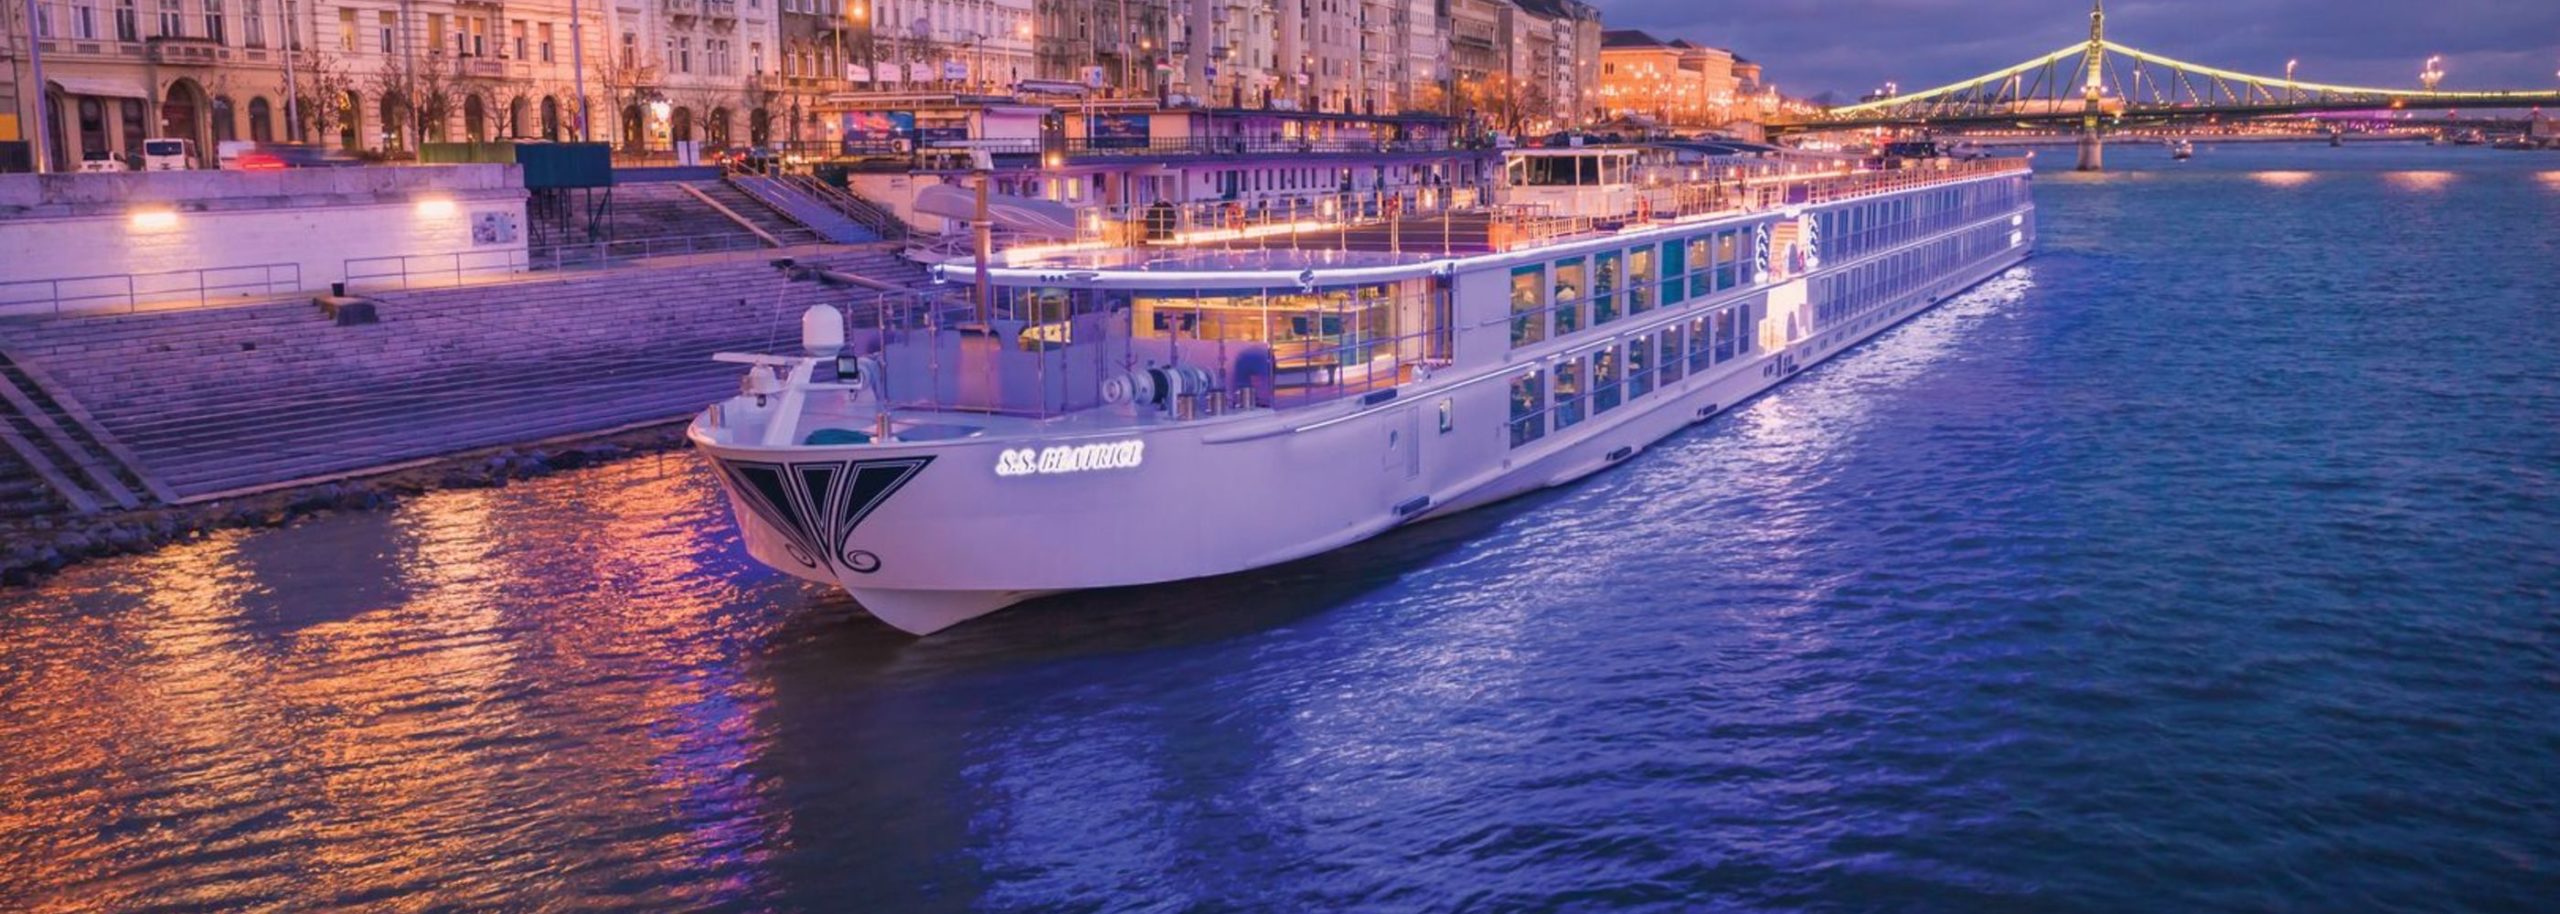 uniworld river cruises what's included